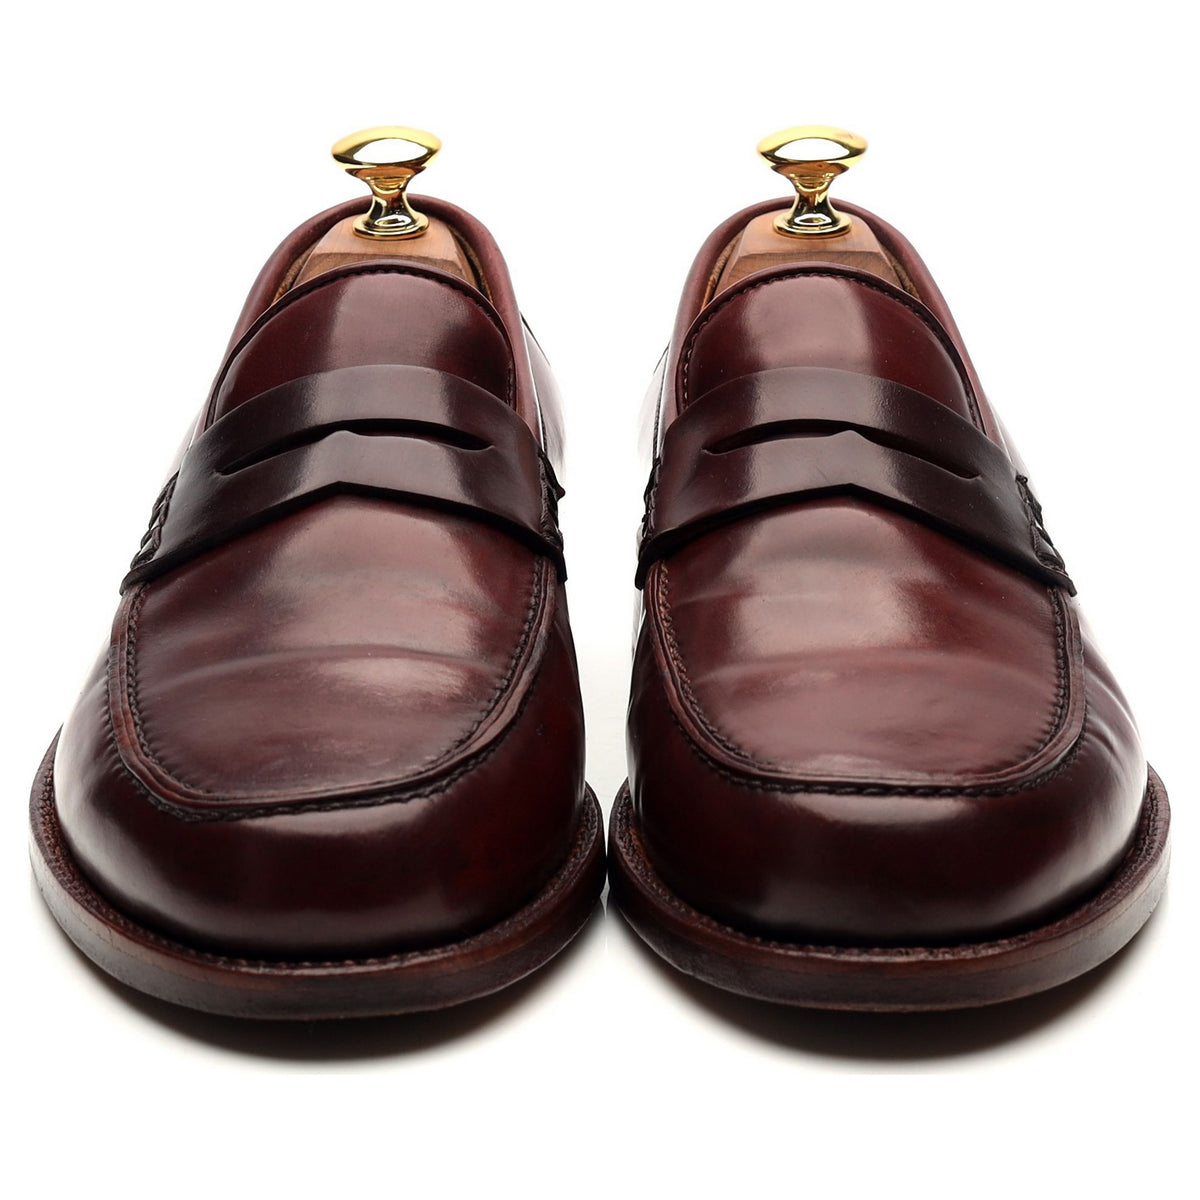 Burgundy Cordovan Leather Loafers UK 6